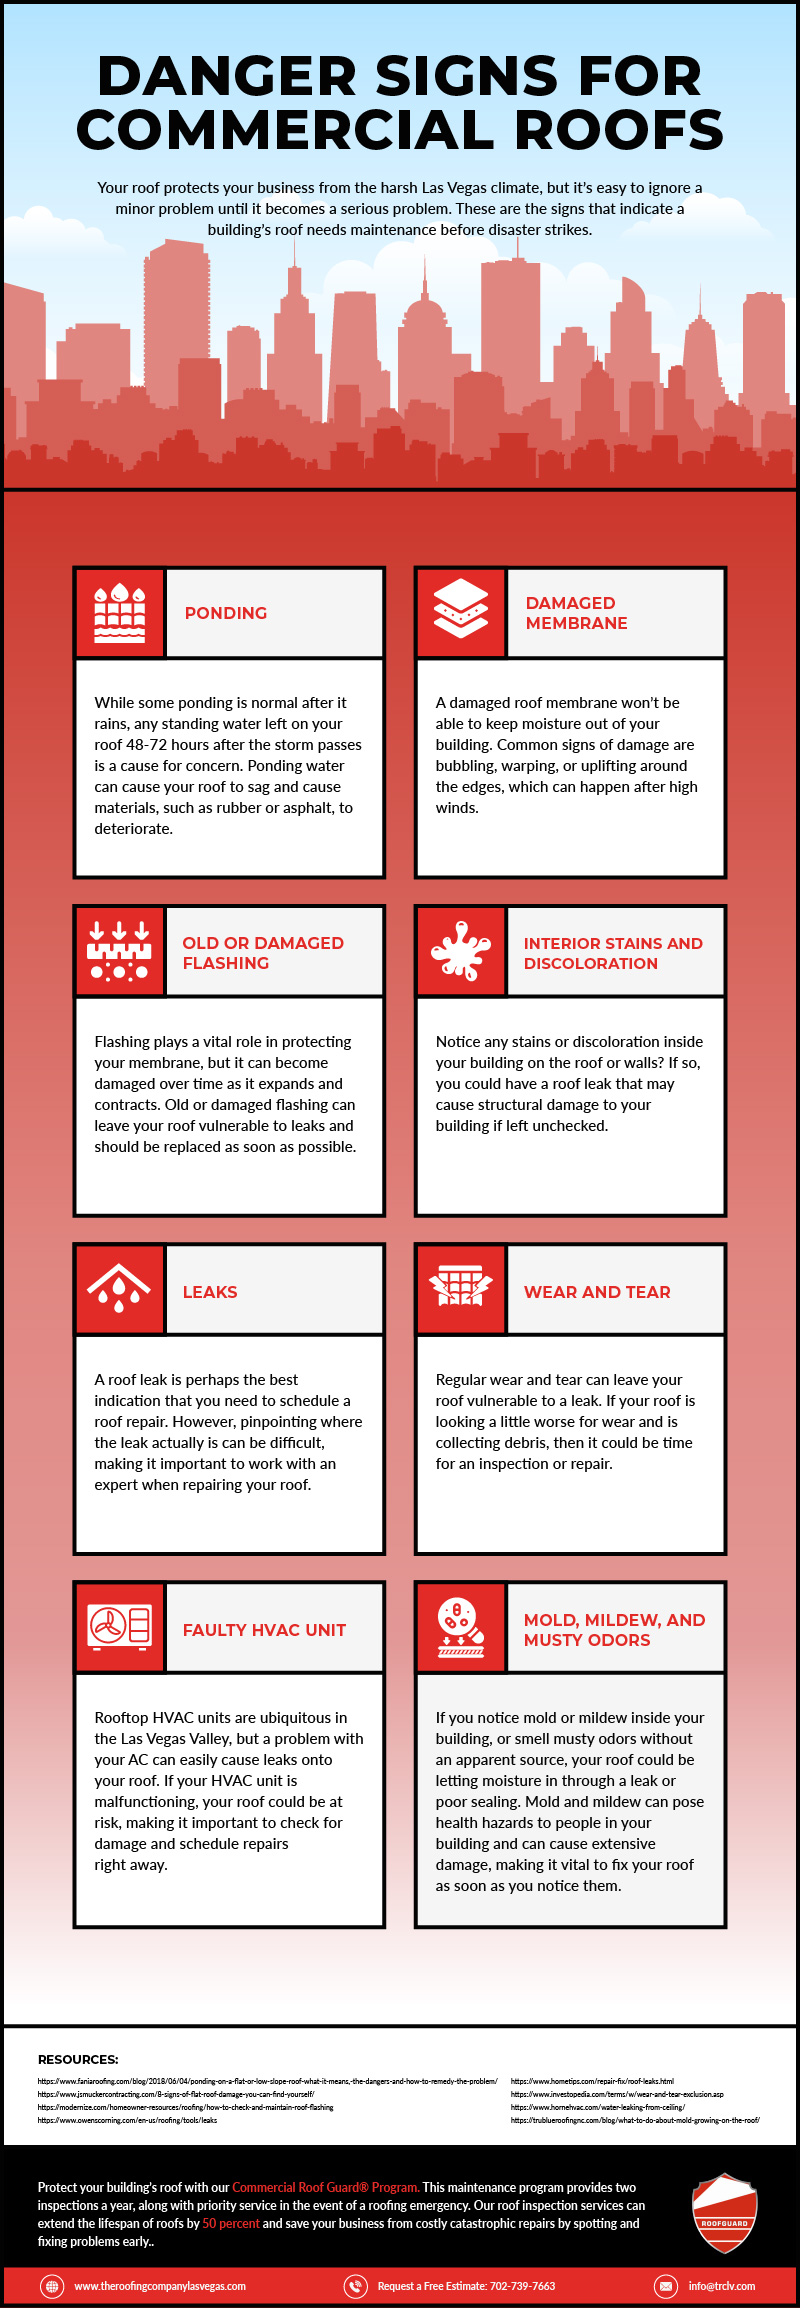 TORC-Infographic-Damage-Signs-for-Commercial-Roofs